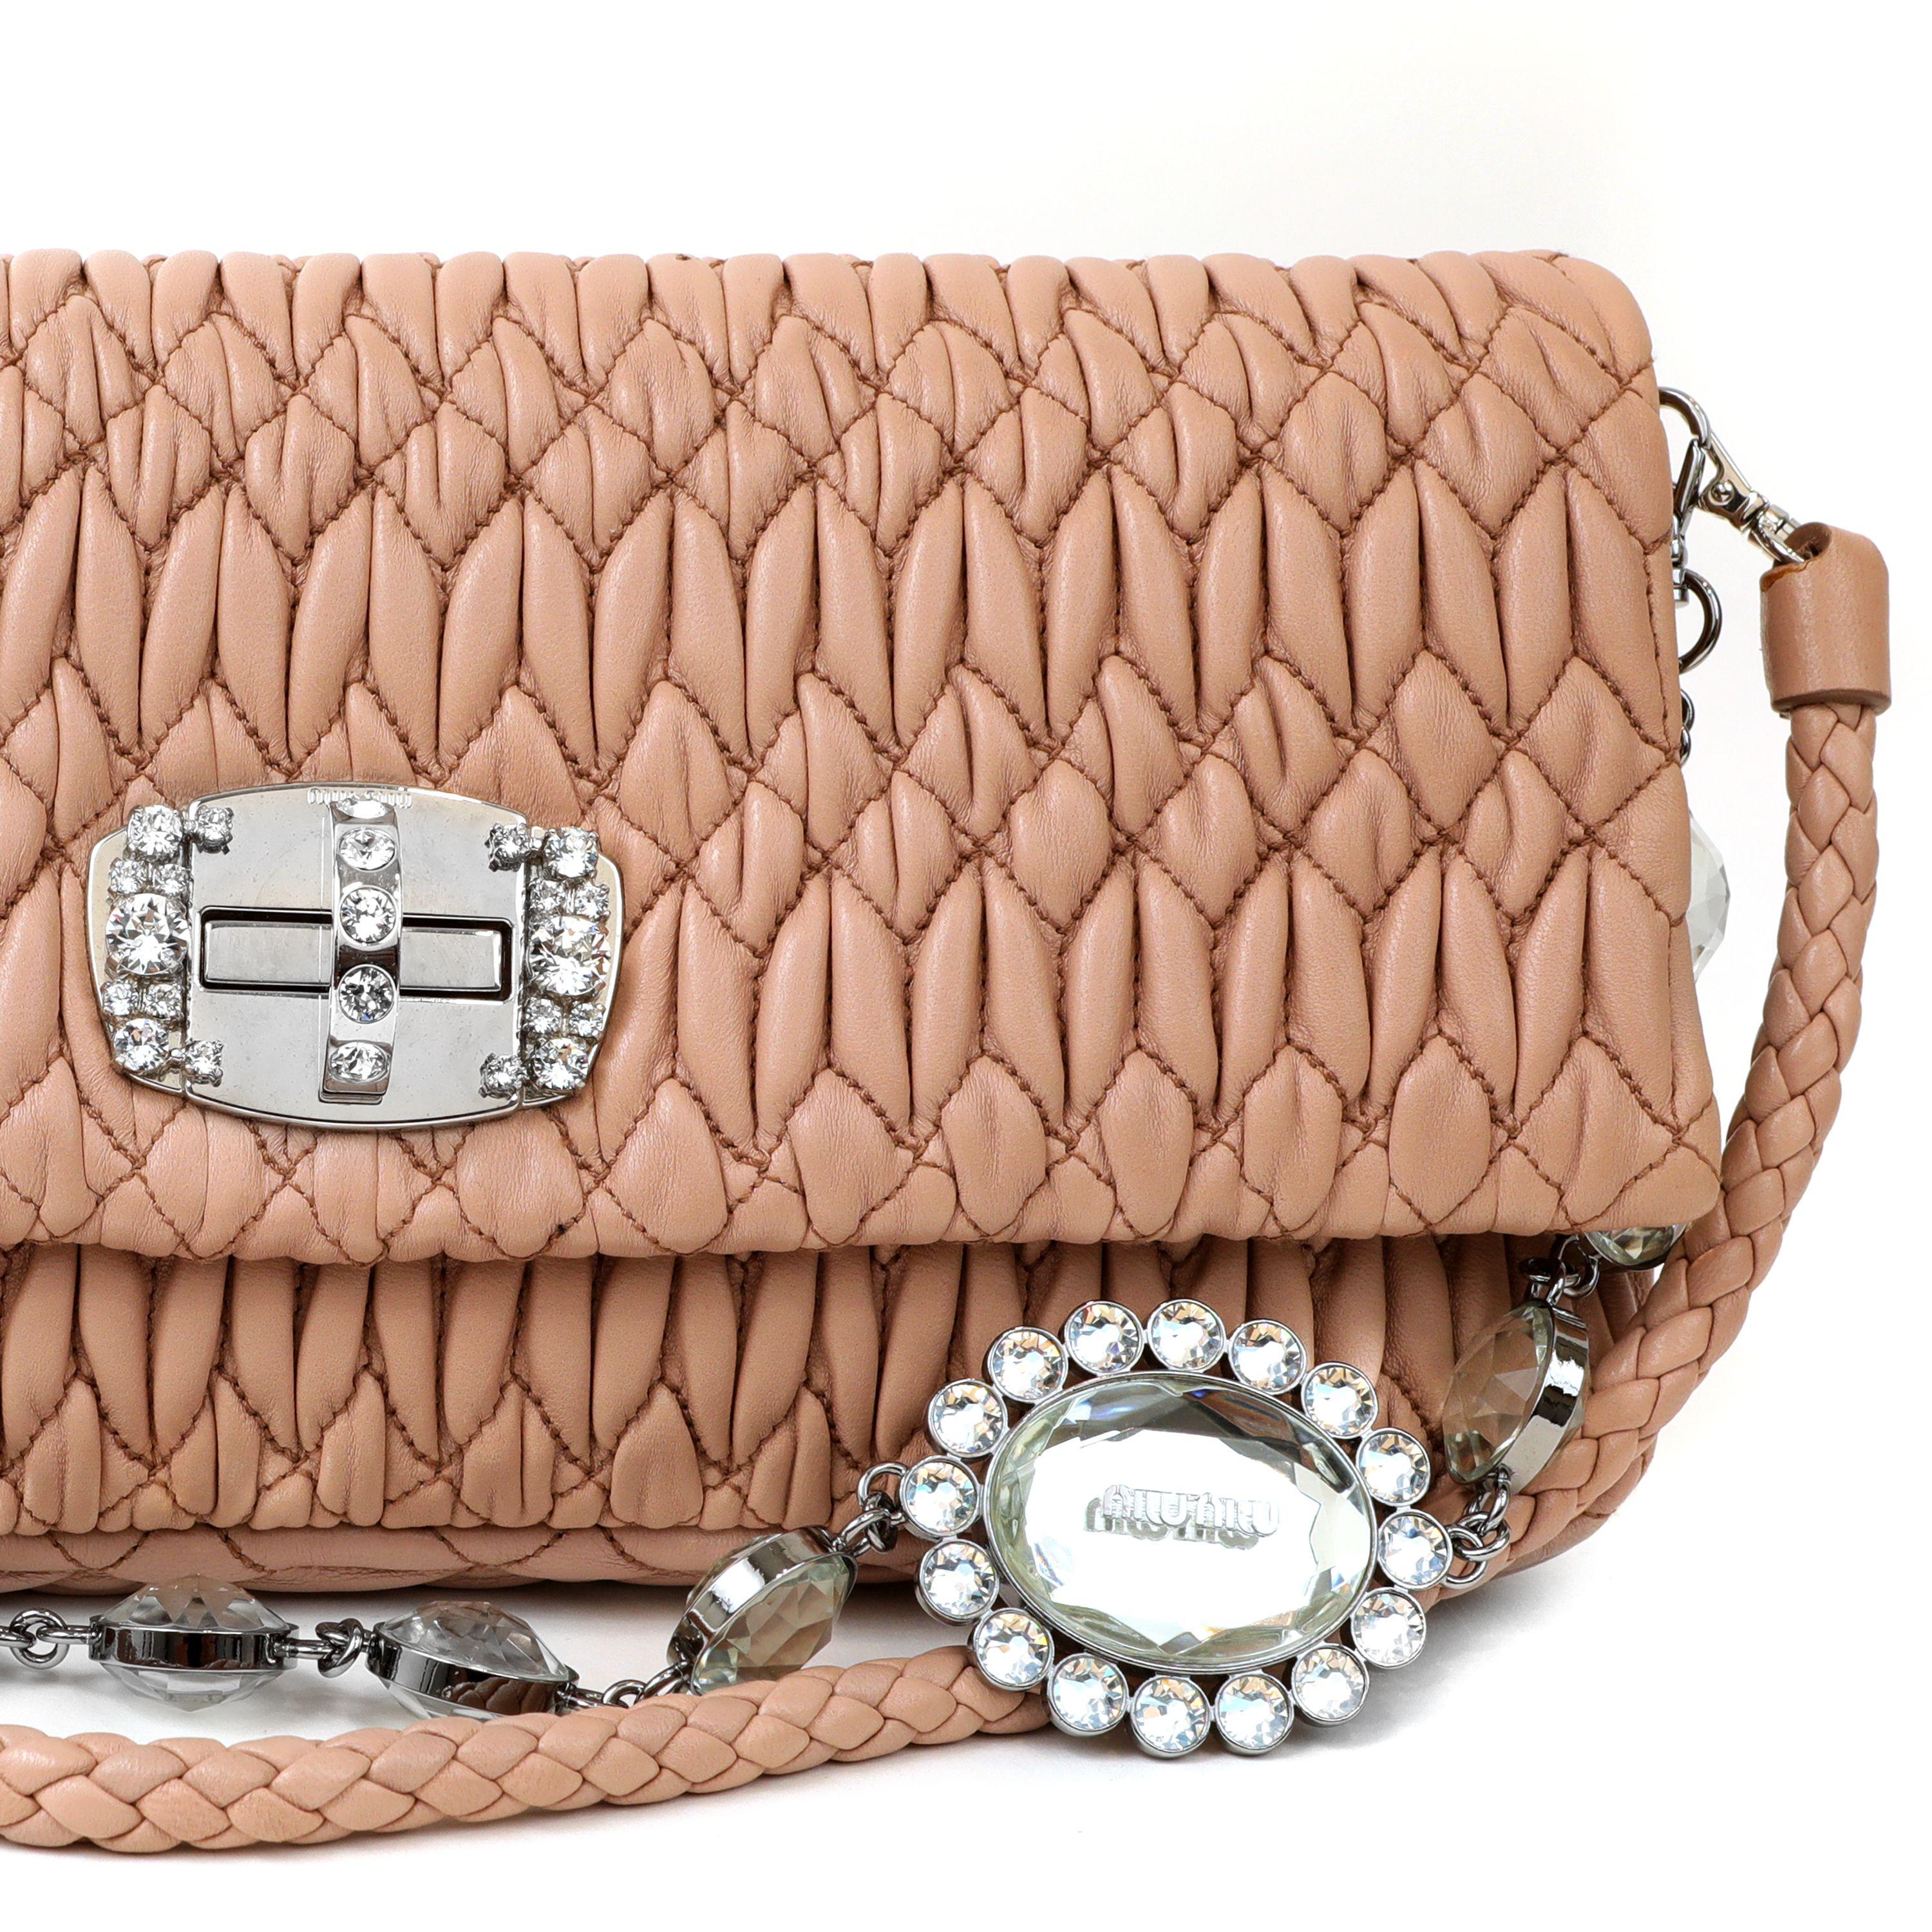 This authentic Miu Miu Nude Crystal Cloquè Small Bag is in pristine condition.  The iconic design features nude quilted Nappa leather and a crystal turn lock closure.  May be carried by the detachable leather strap or the decorative crystal strap.